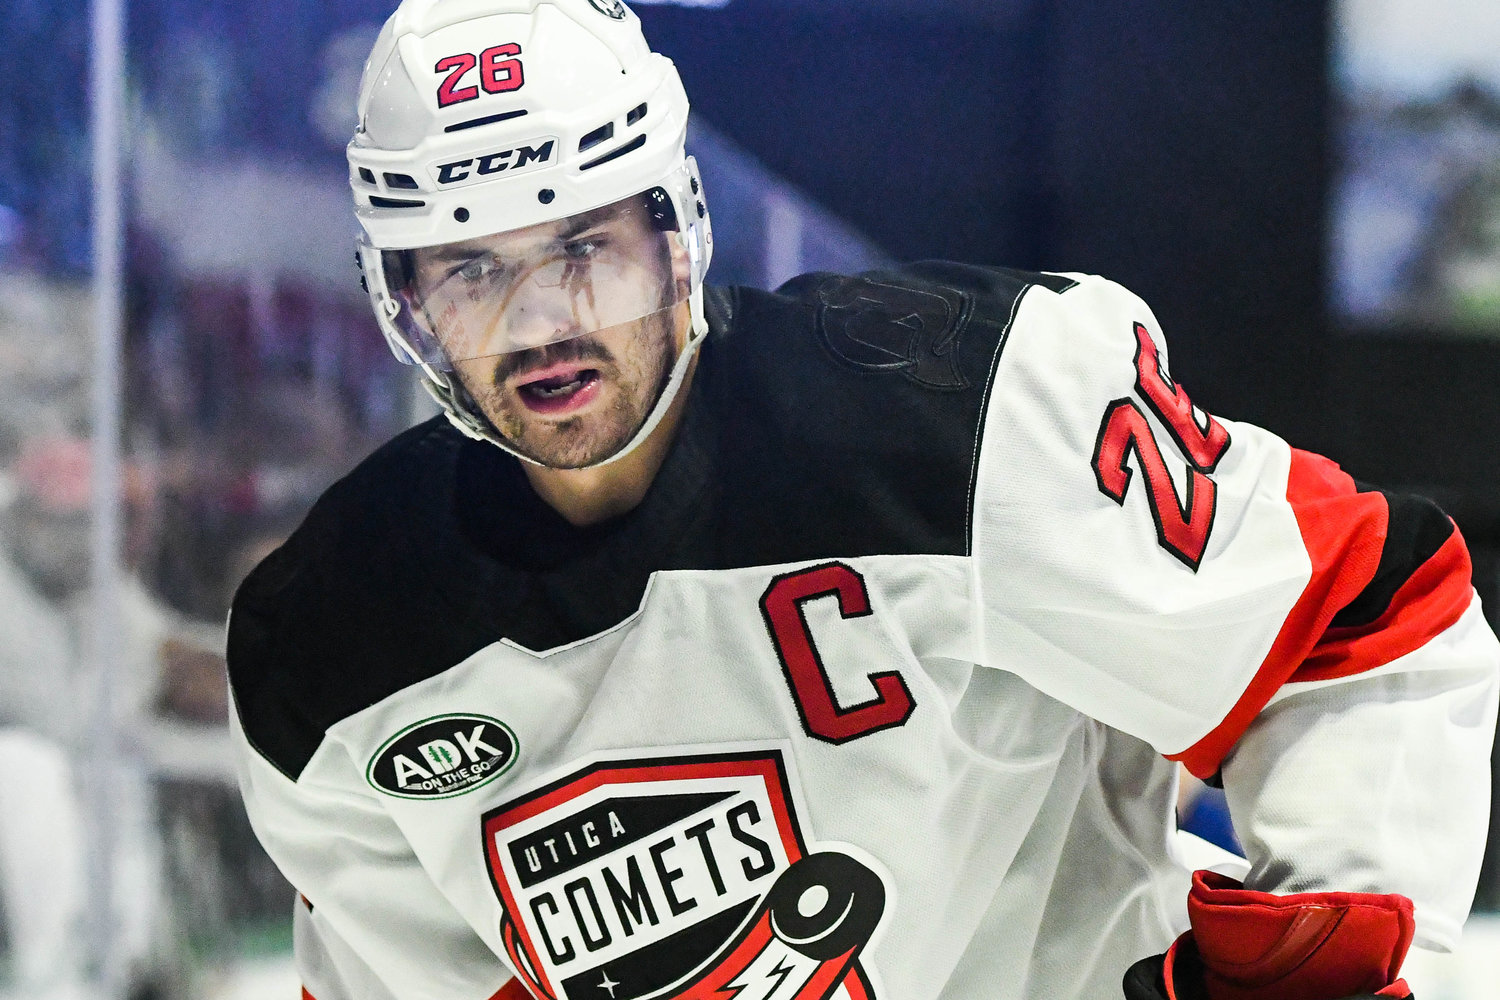 Ryan Schmelzer was the Utica Comets captain during the team’s first season as the American Hockey League affiliate of the New Jersey Devils. Schmelzer signed a two-year extension to remain with the team during the offseason.